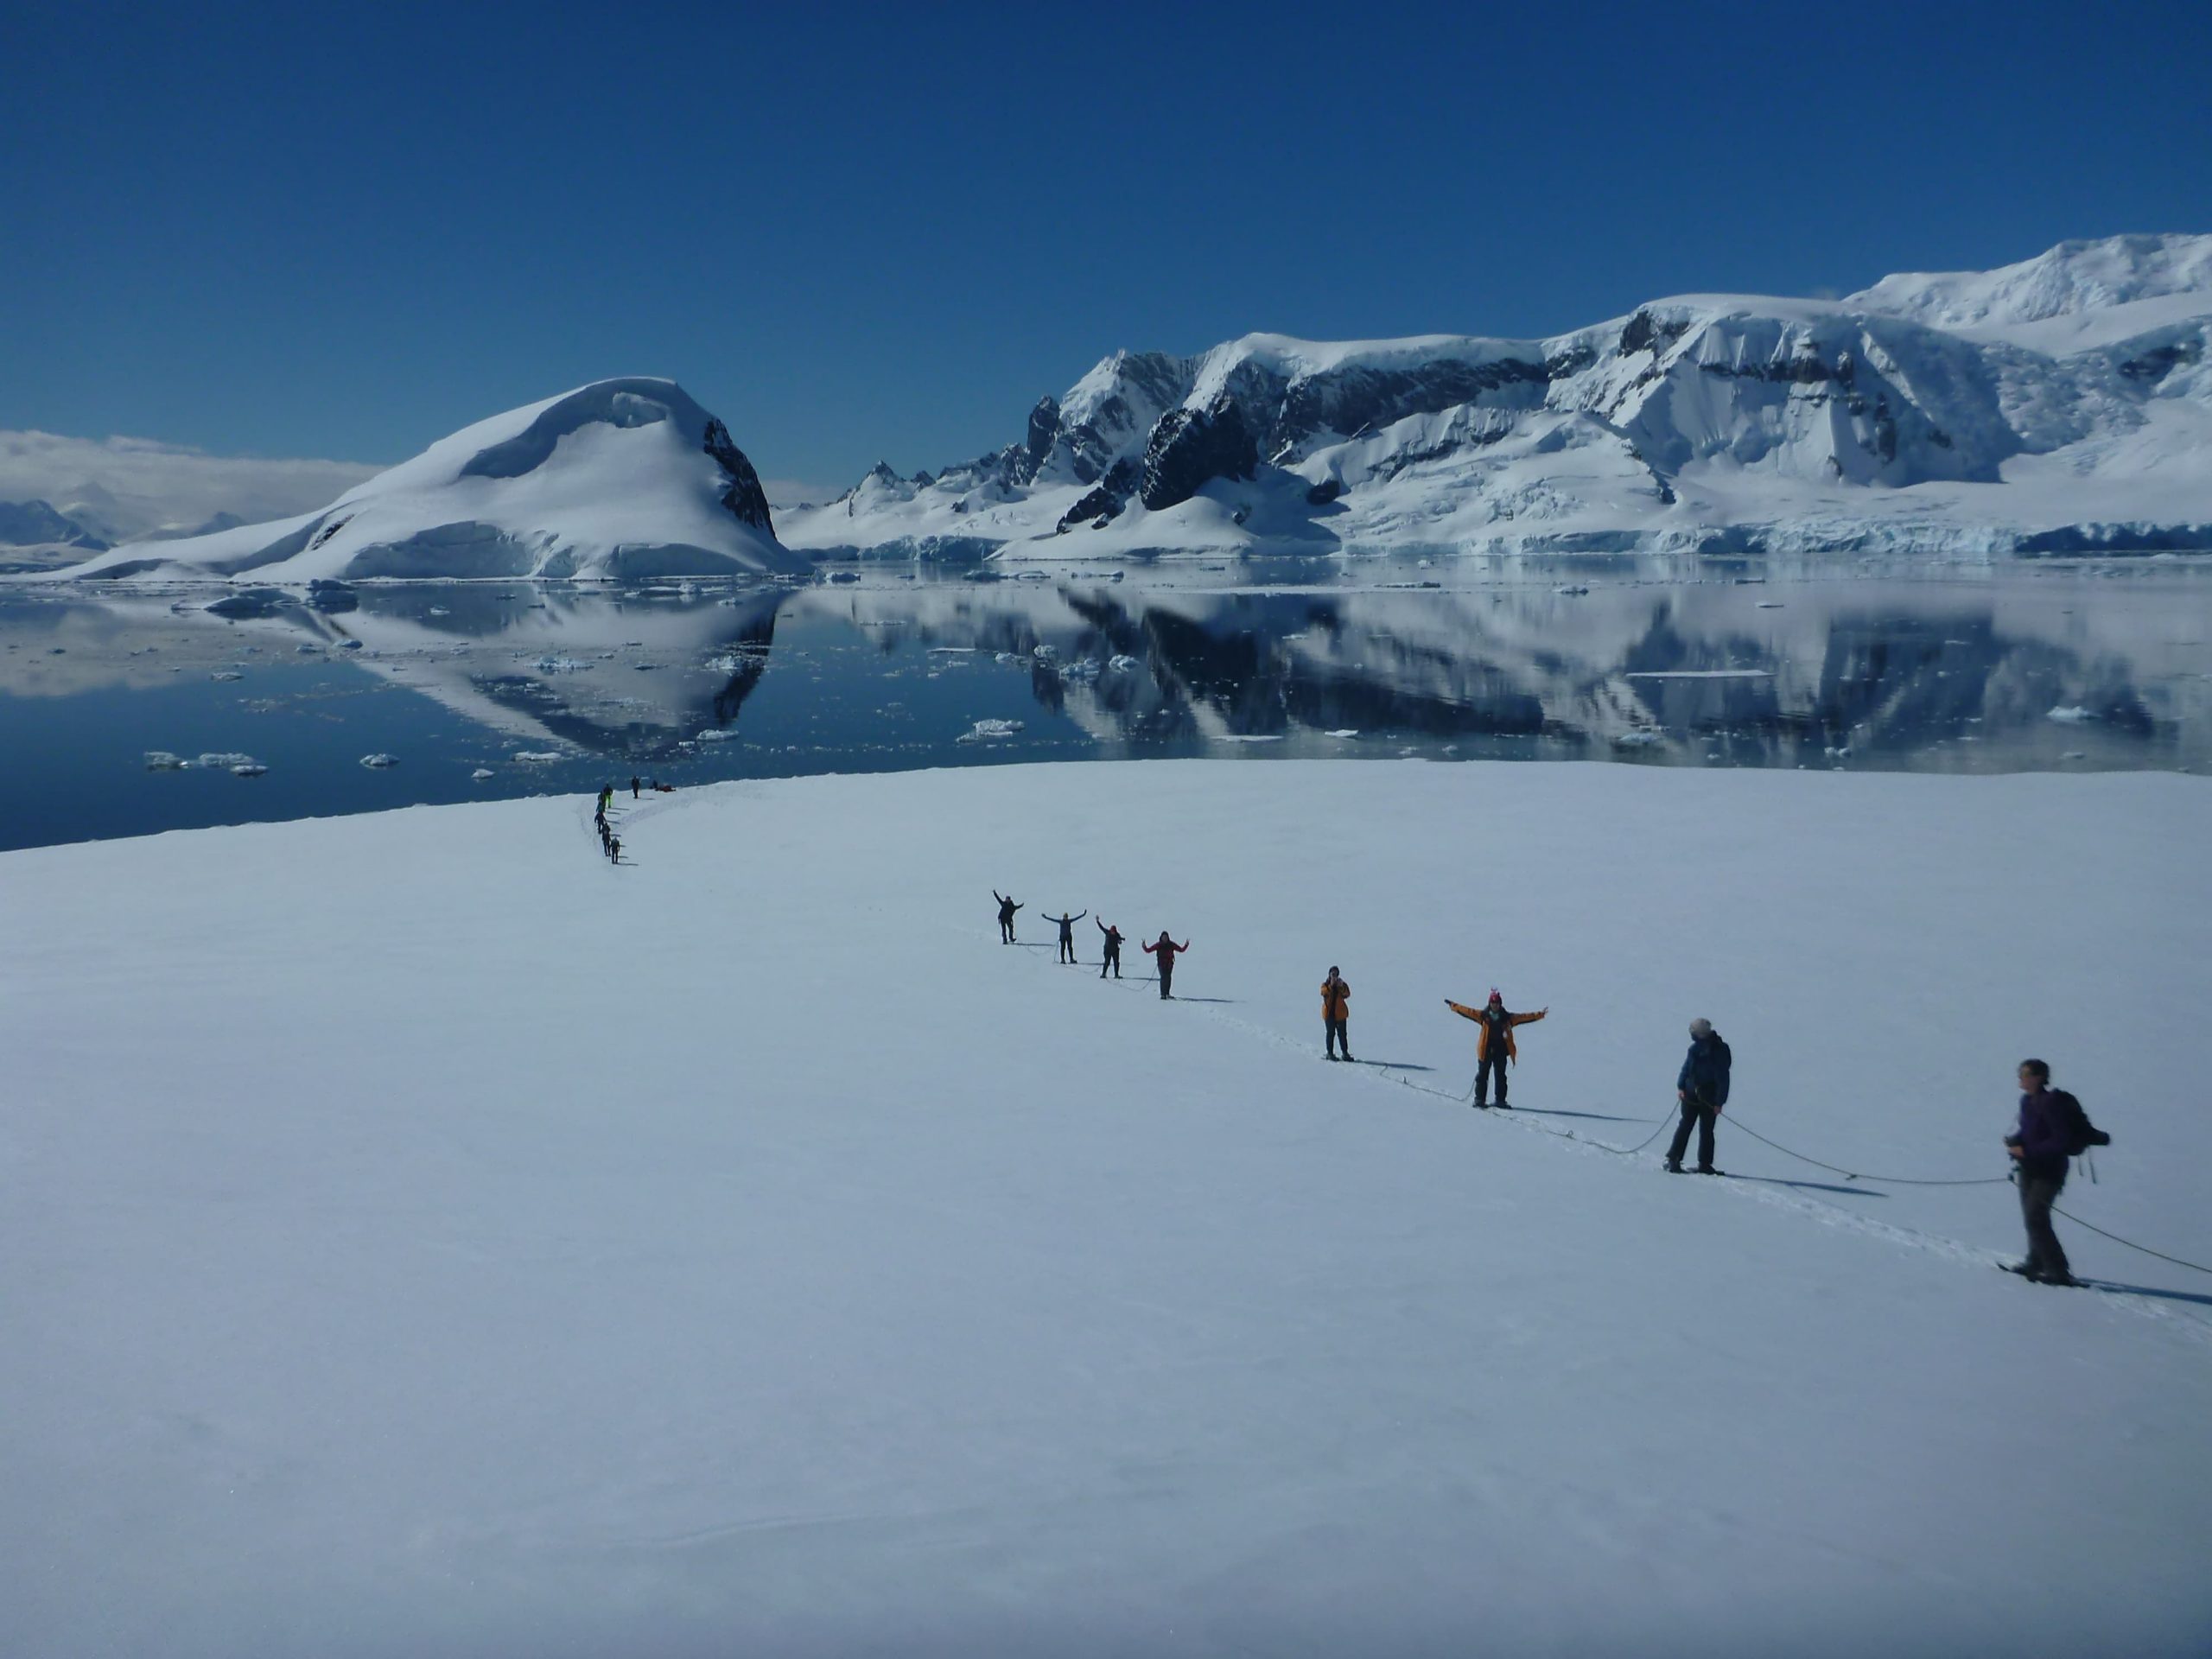 Antarctic mountaineers pose on a snow field